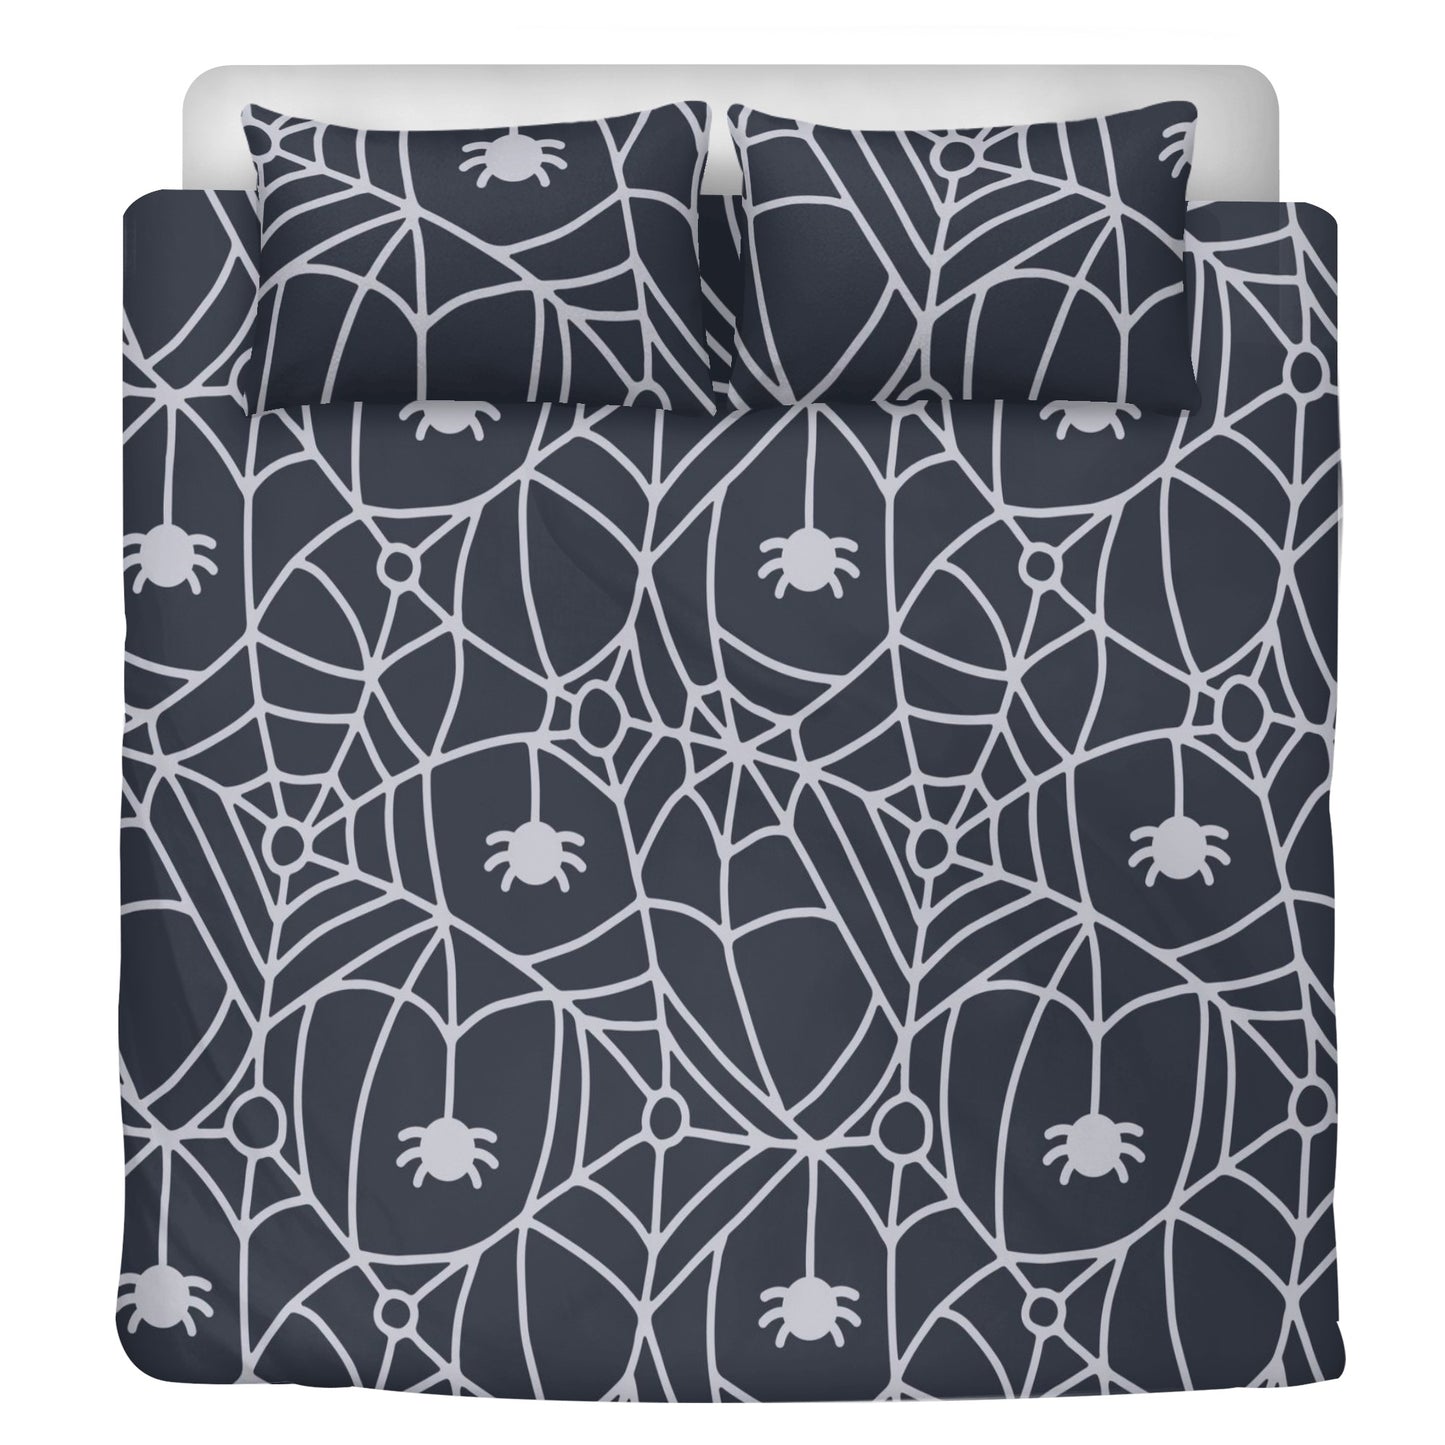 Dangling Spider And Spider Webs 3 Pcs Beddings